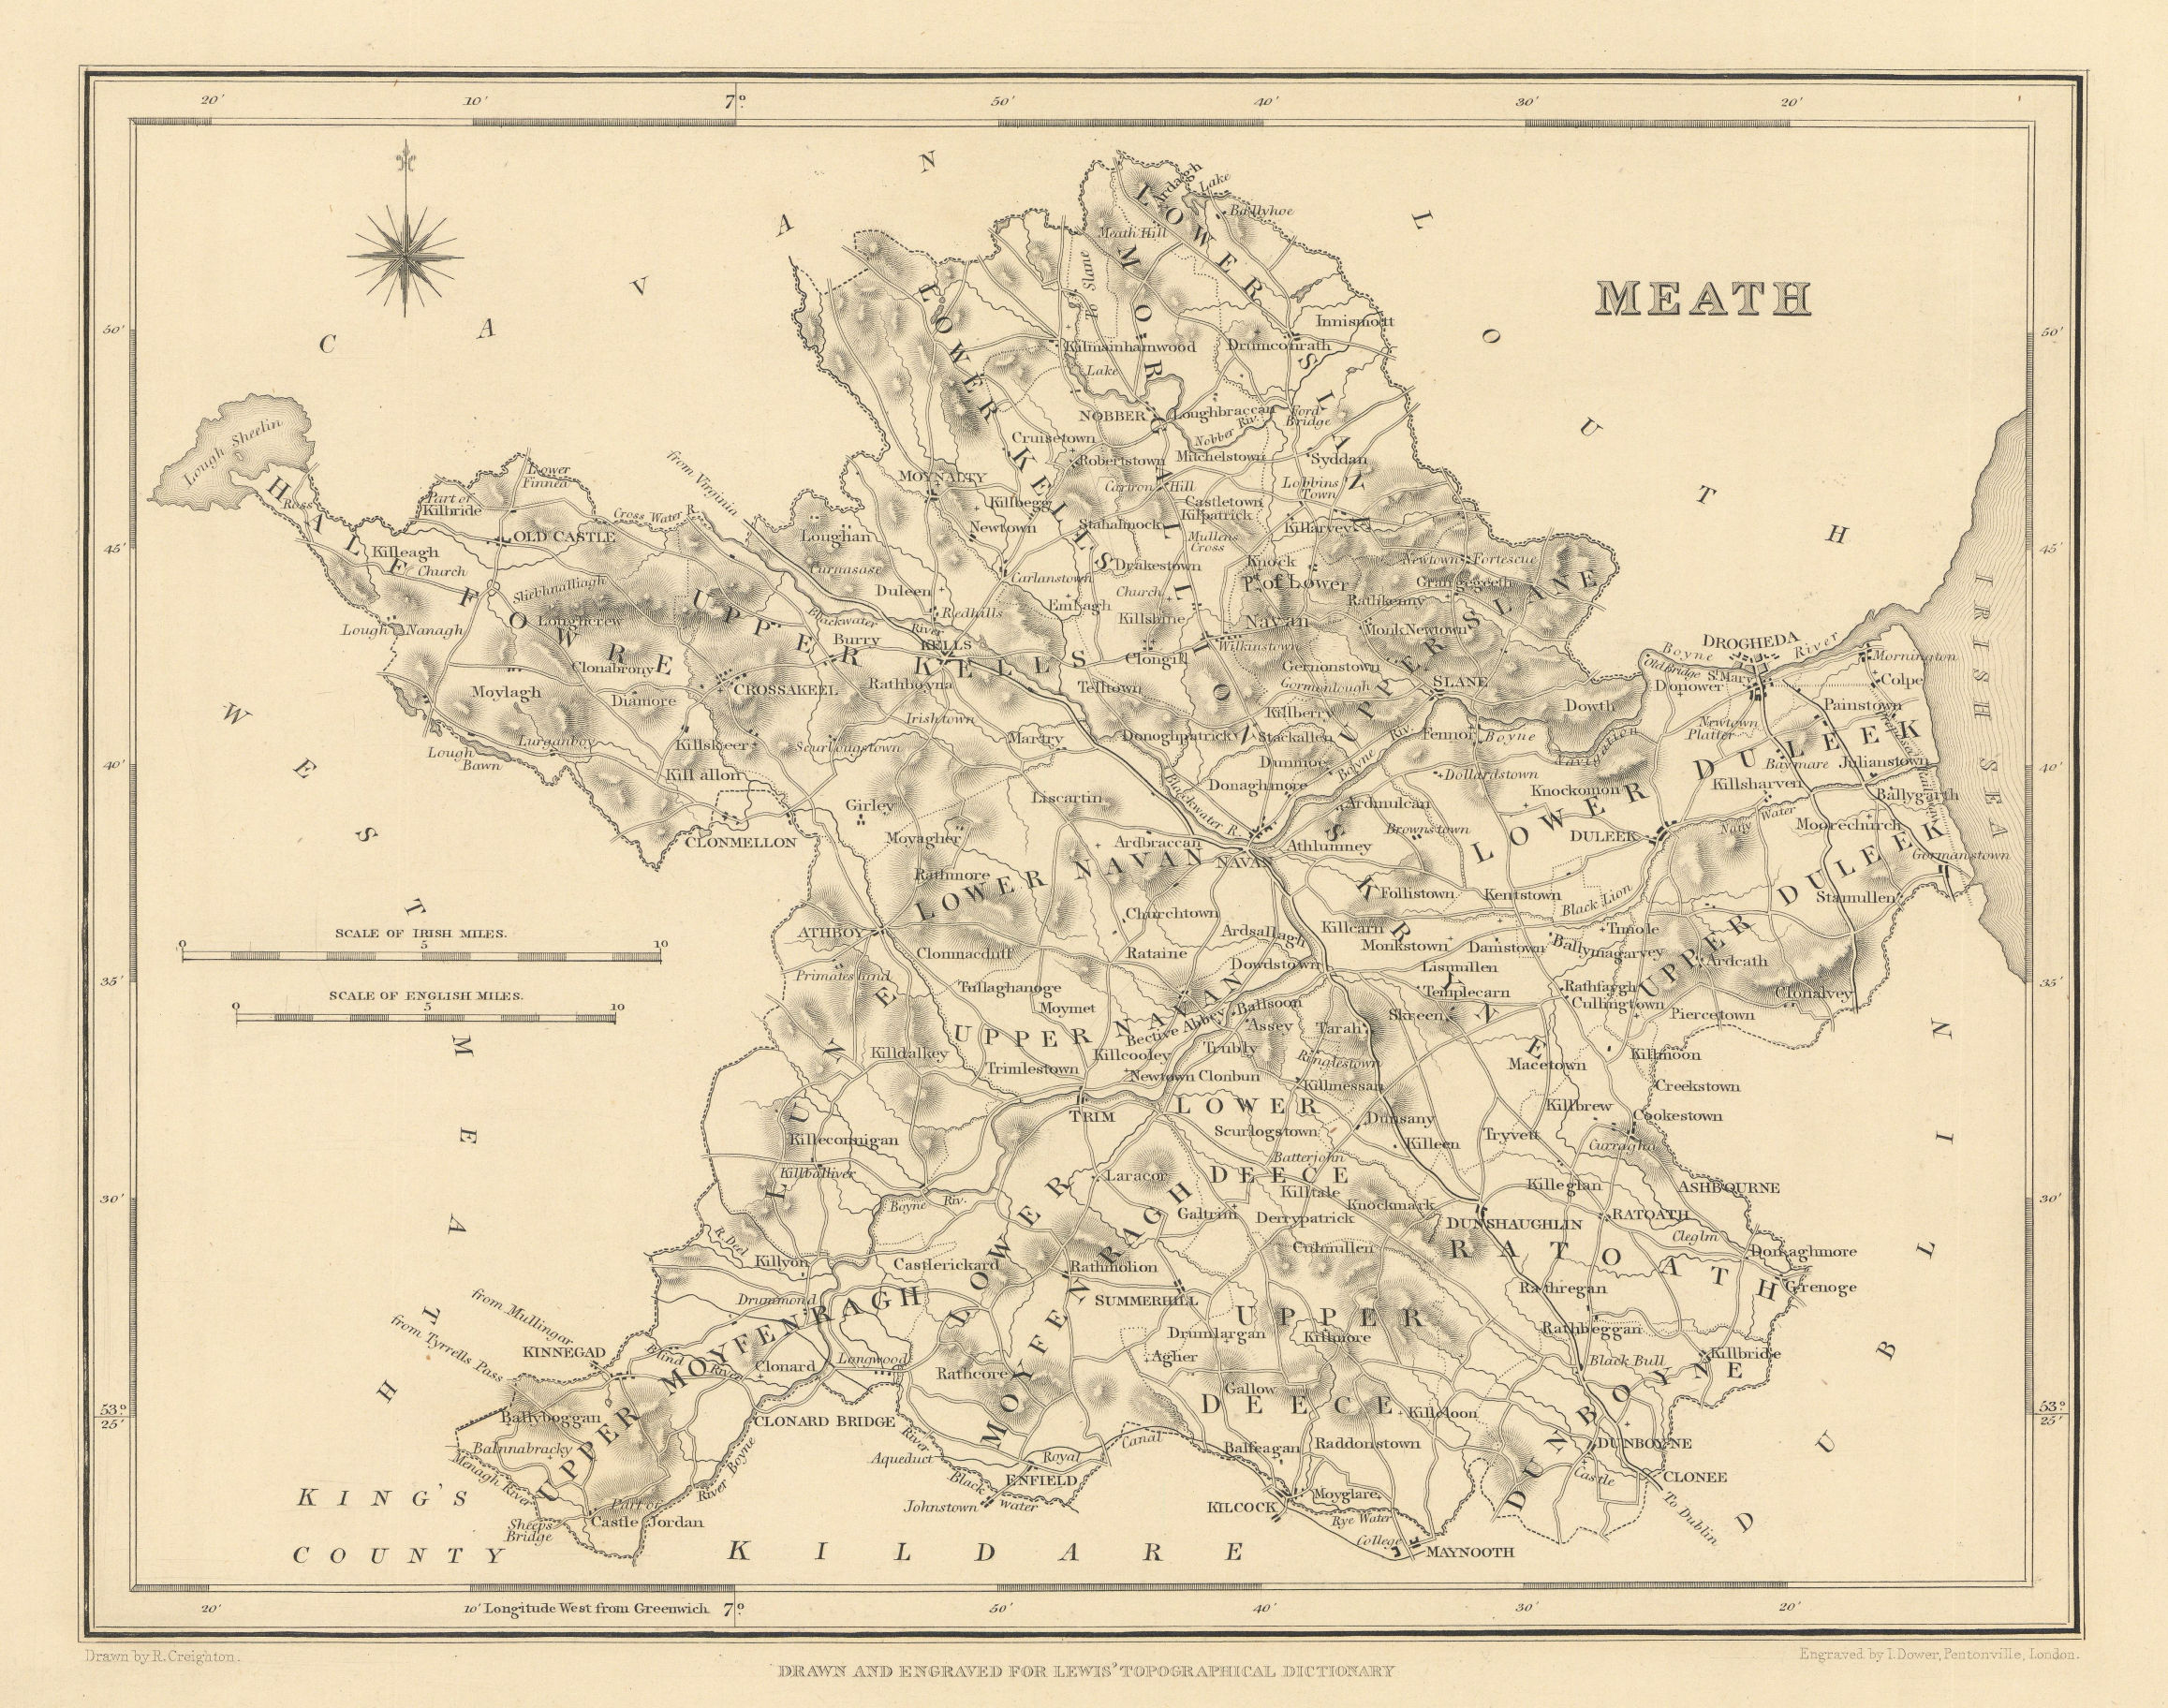 Associate Product COUNTY MEATH antique map for LEWIS by CREIGHTON & DOWER - Ireland 1837 old